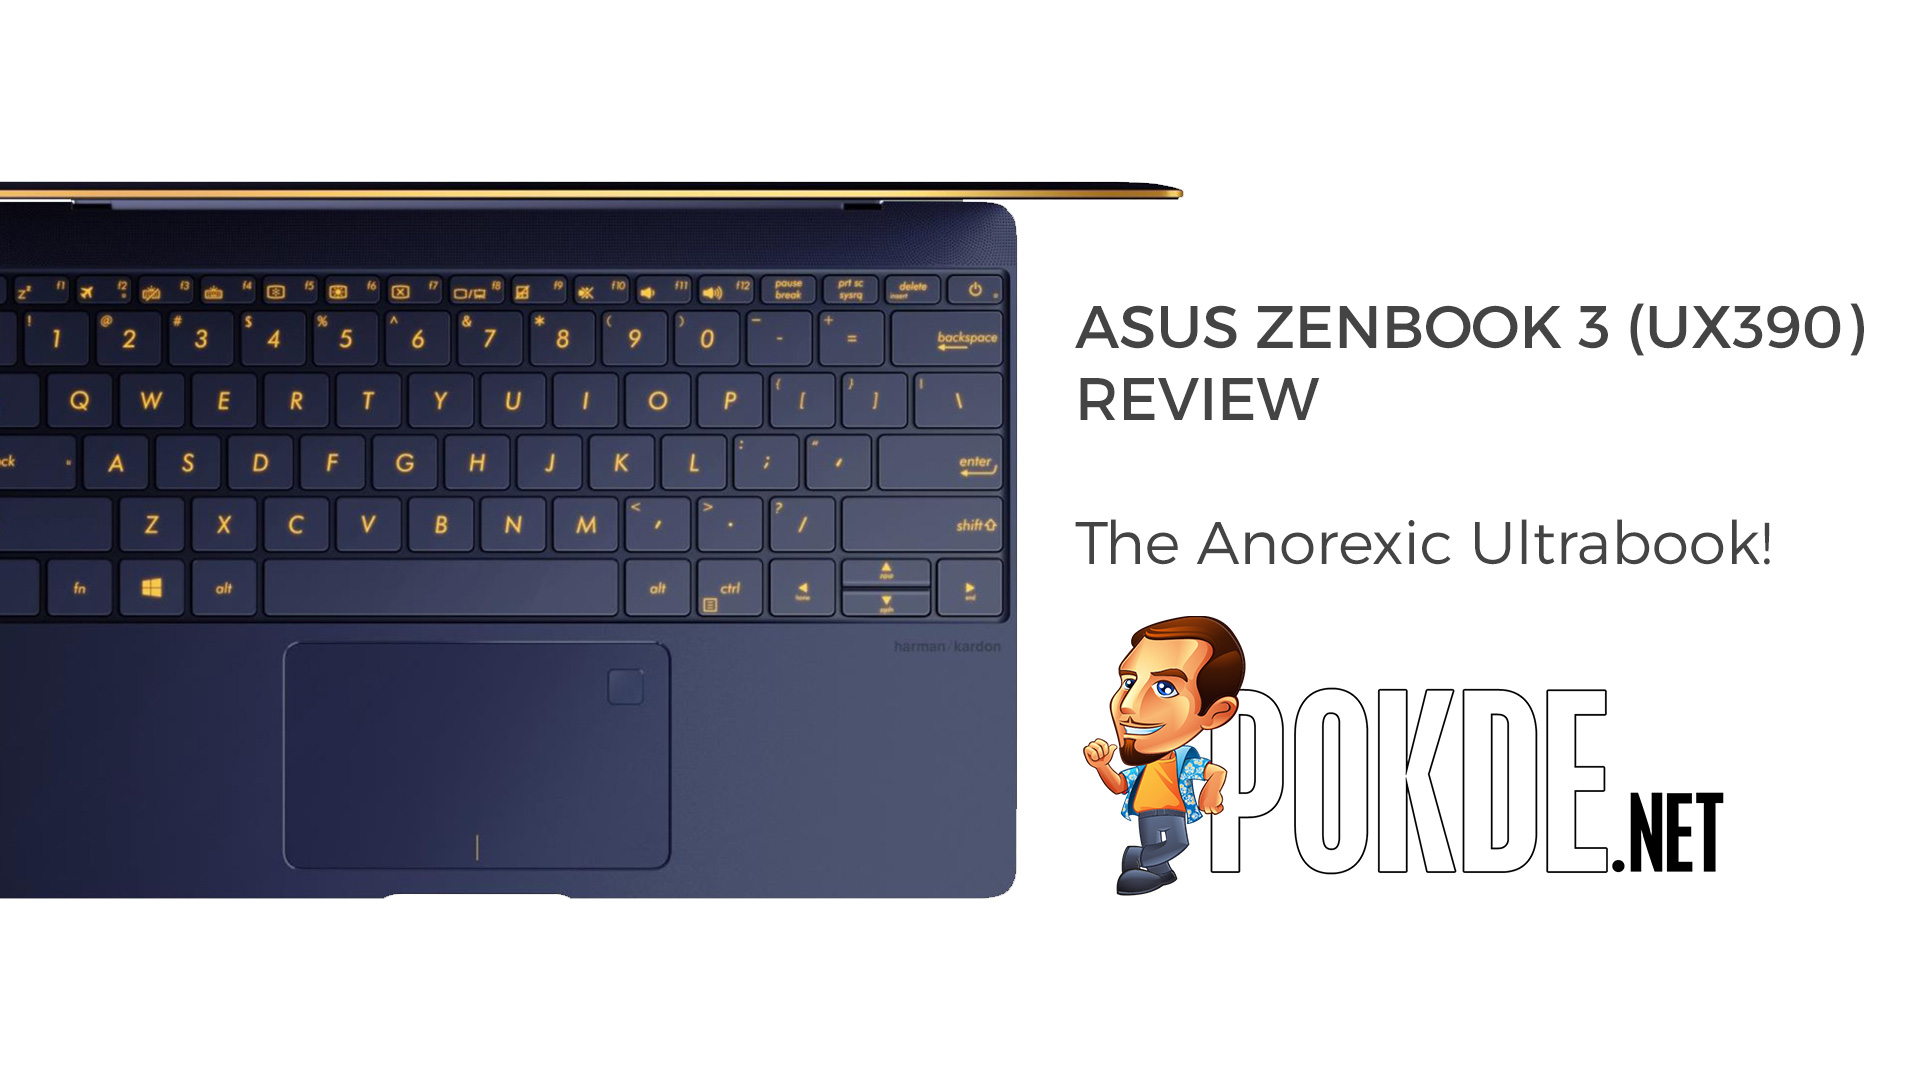 Asus ZenBook 3 (UX390) Review - The Anorexic Ultrabook 25